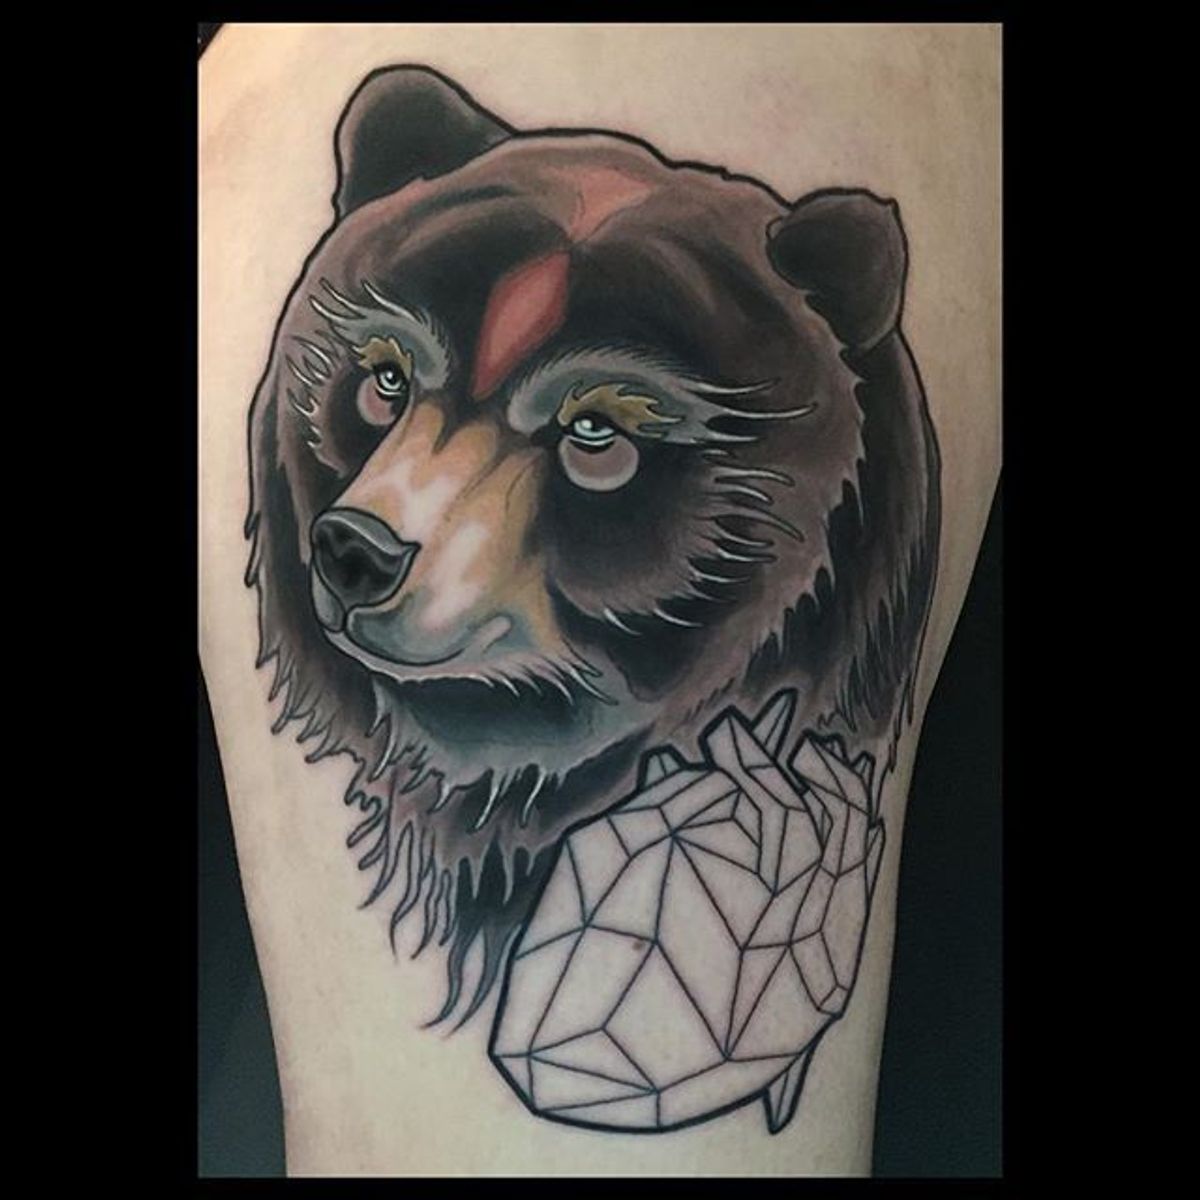 Tattoo uploaded by Robert Davies • Neo Traditional Bear Tattoo by Brian